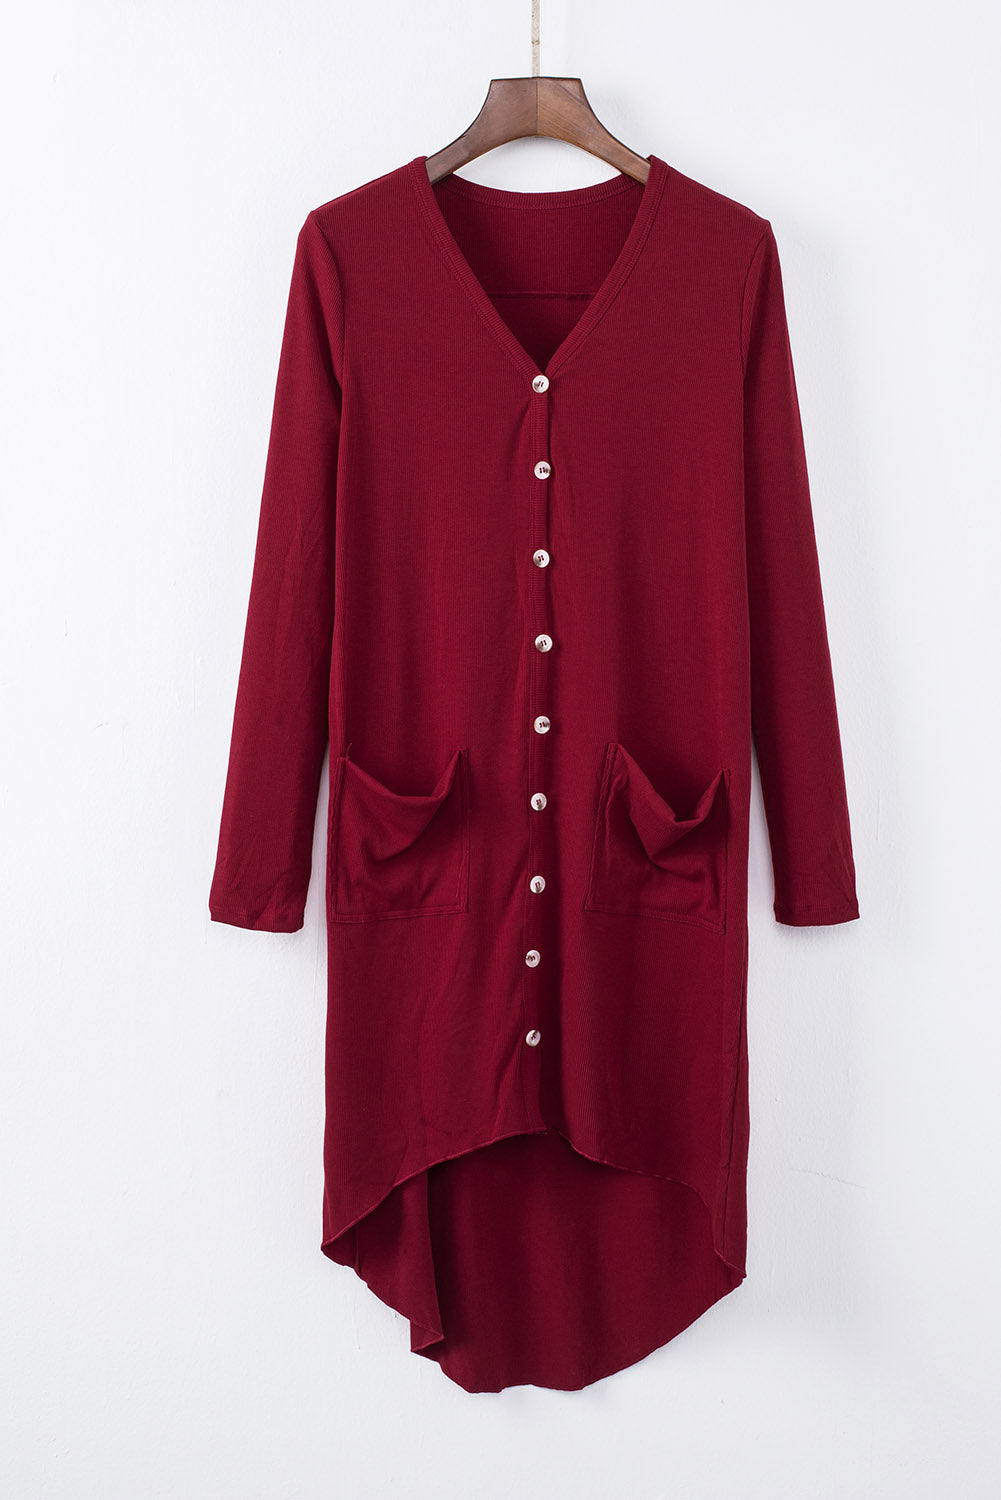 V-Neck High-Low Cardigan with Pockets